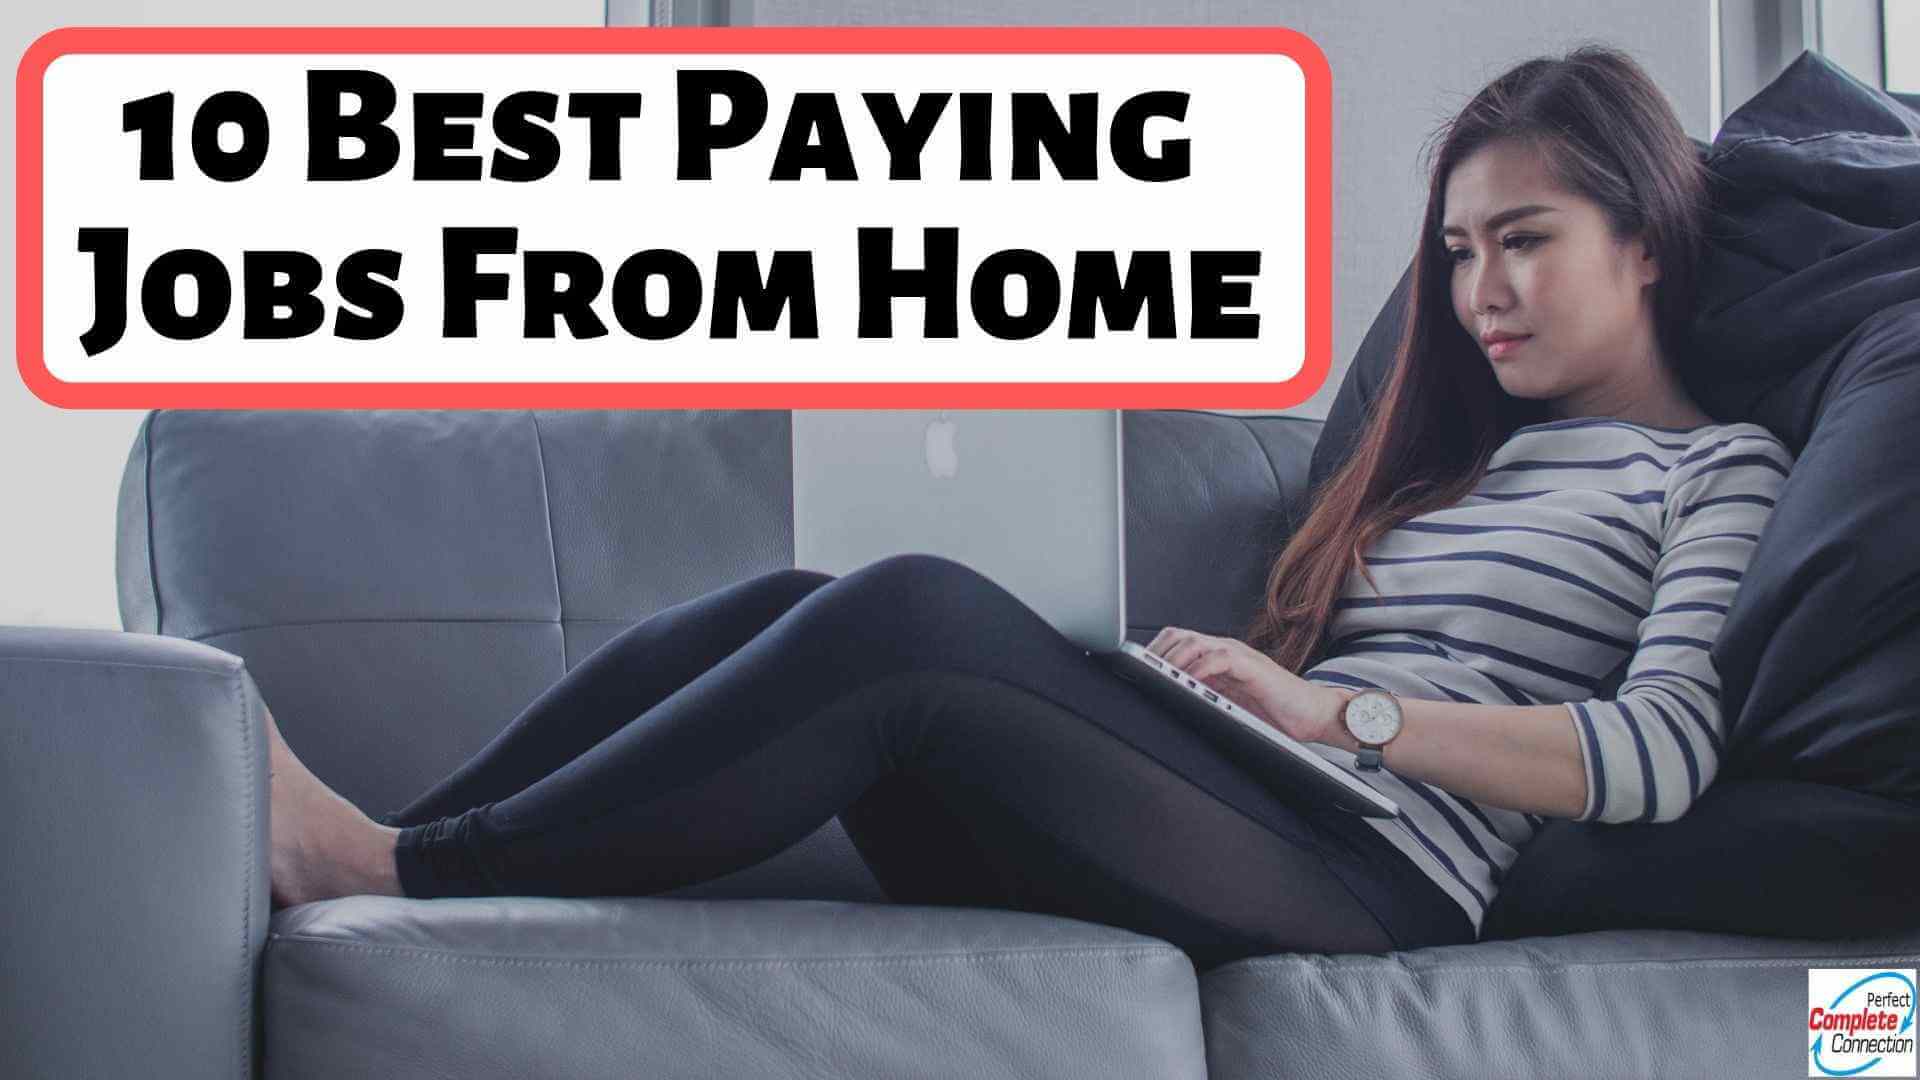 10 Best Paying Jobs From Home